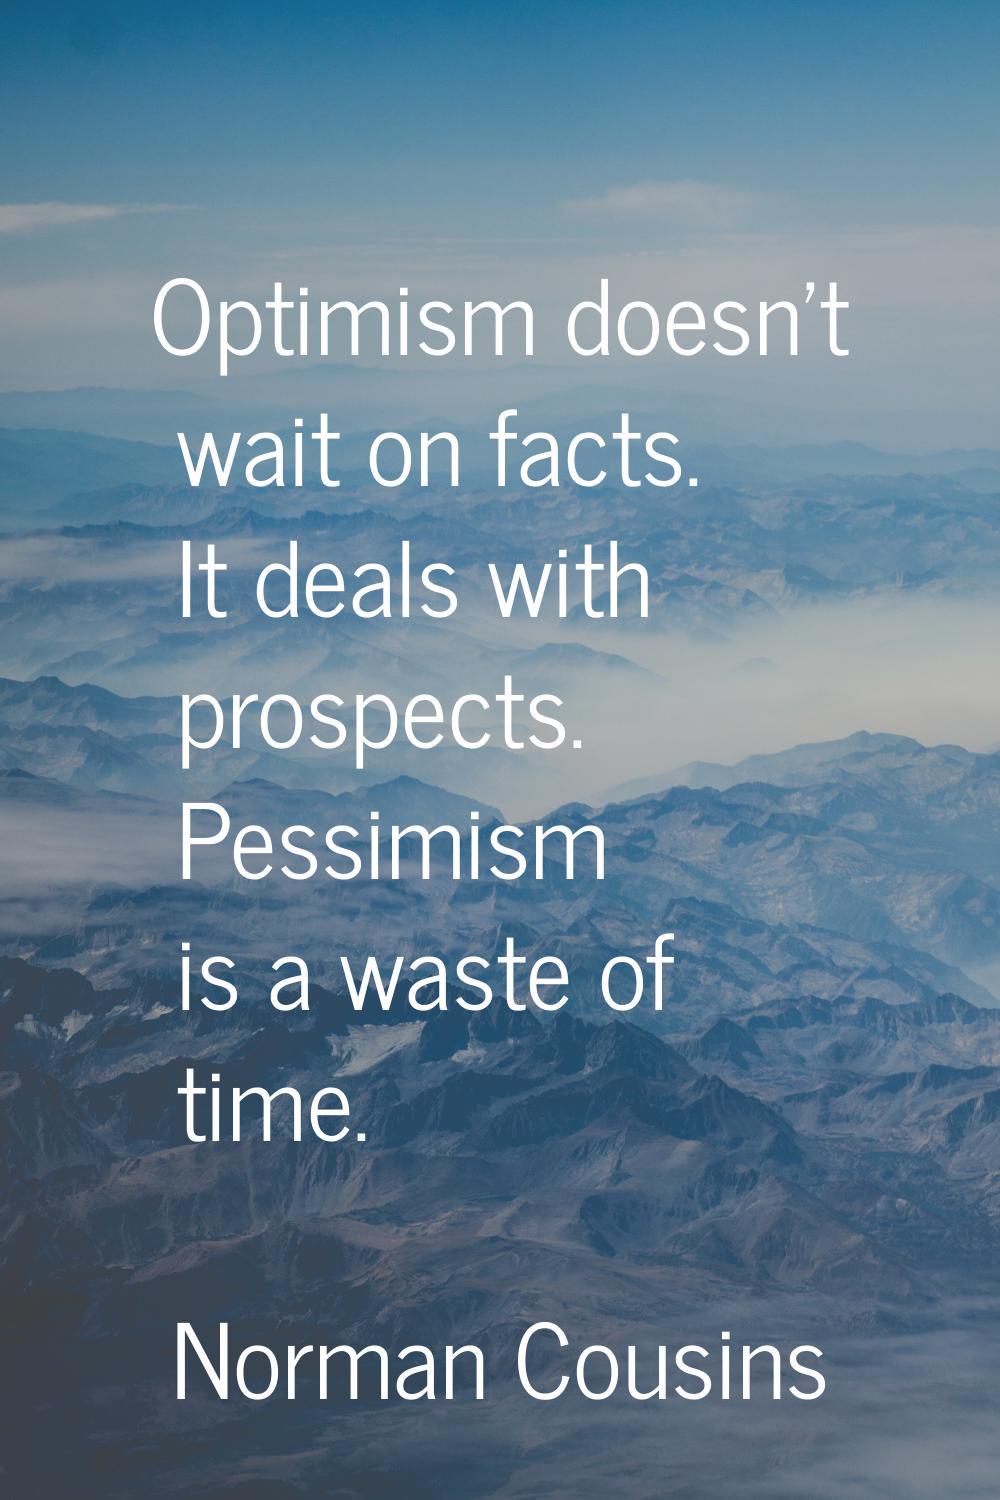 Optimism doesn't wait on facts. It deals with prospects. Pessimism is a waste of time.